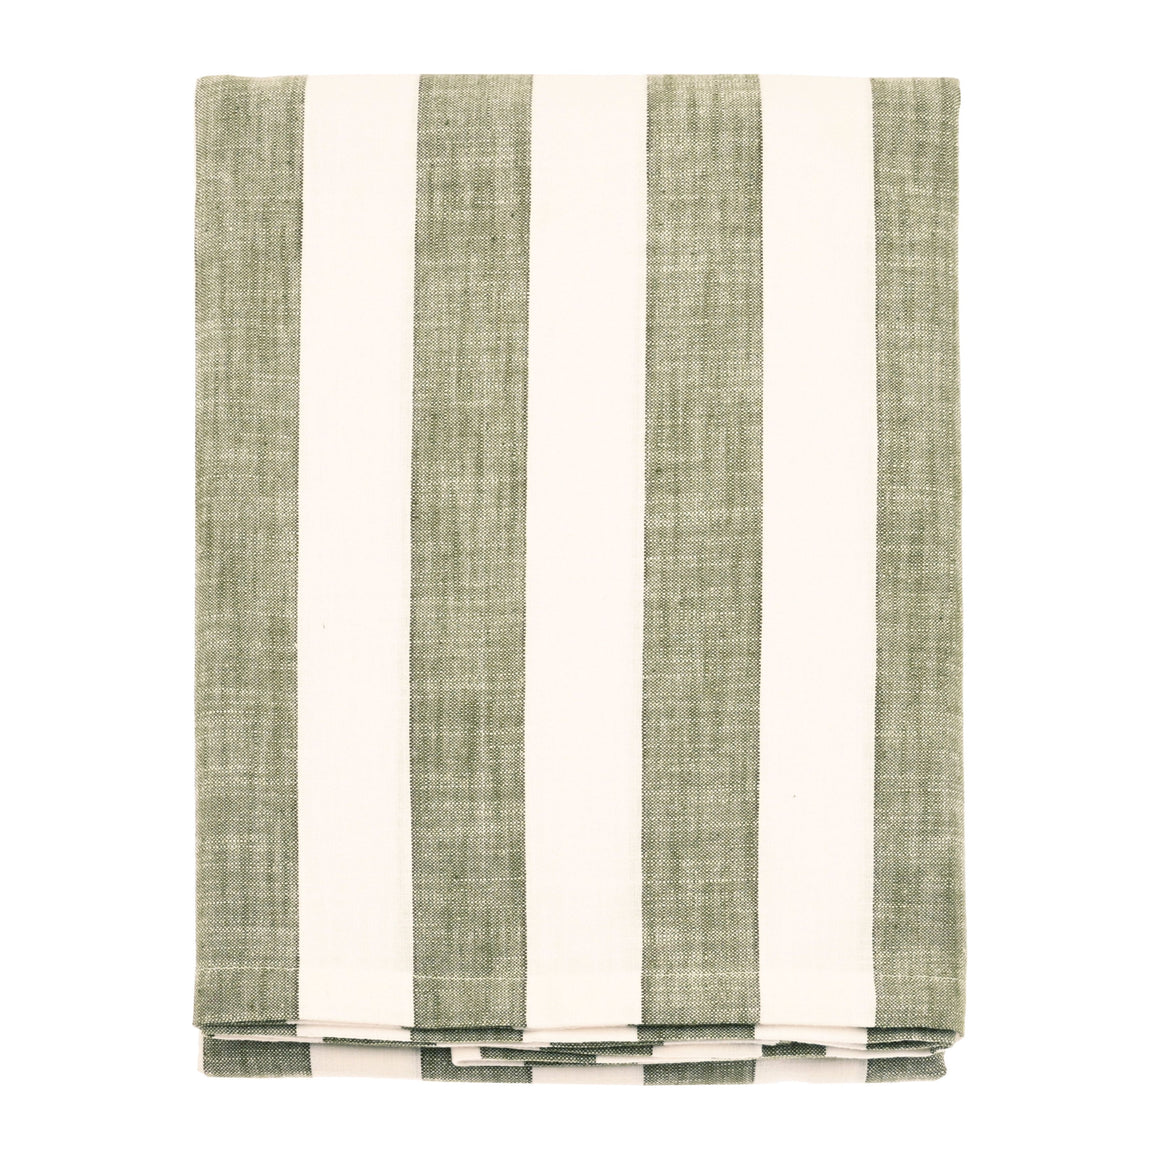 Walton & Co Olive Wide Stripe Tablecloth - All Sizes